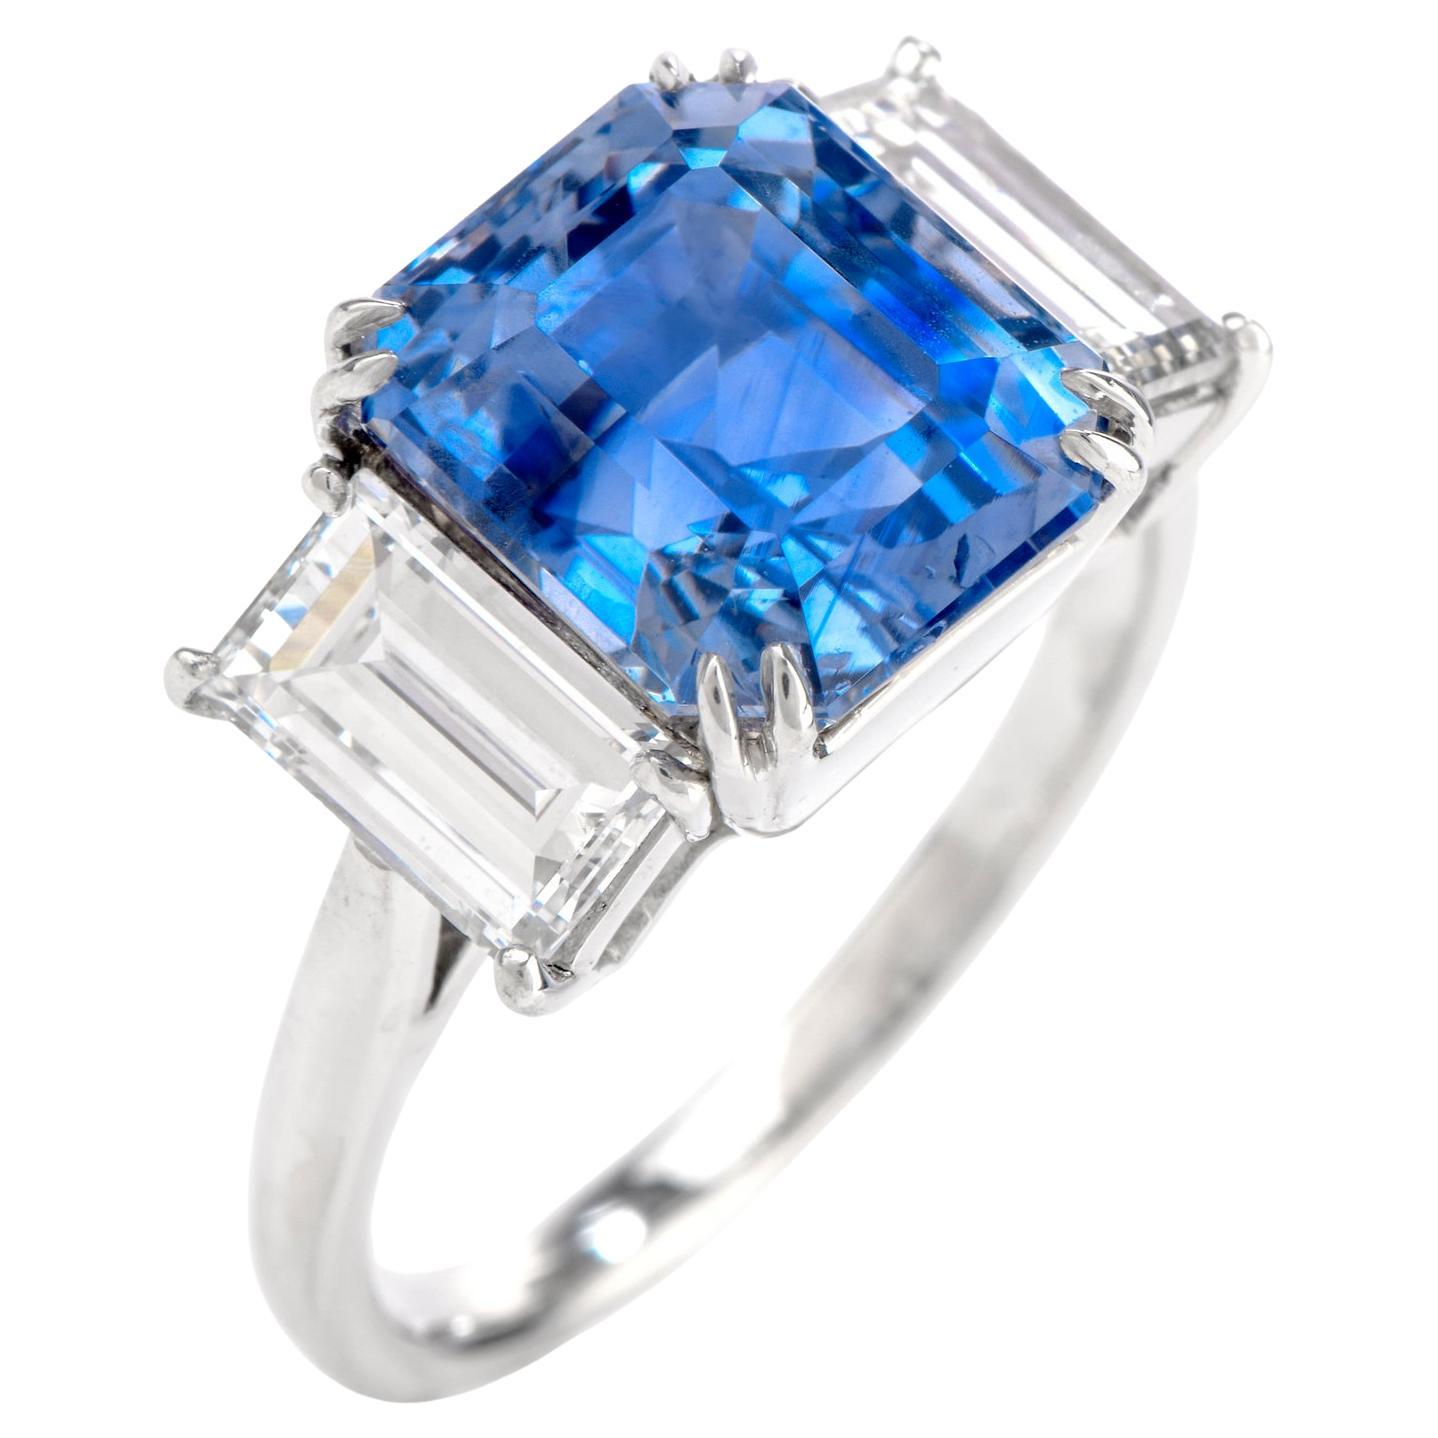 Rare Sapphire!

All Natural No Heat Sapphire from Kashmir region GIA certified. This very rare sapphire ring was inspired by a 3 stone motif and crafted in luxurious Platinum. Featuring a Step cut rectangular shaped natural Kashmir sapphire All